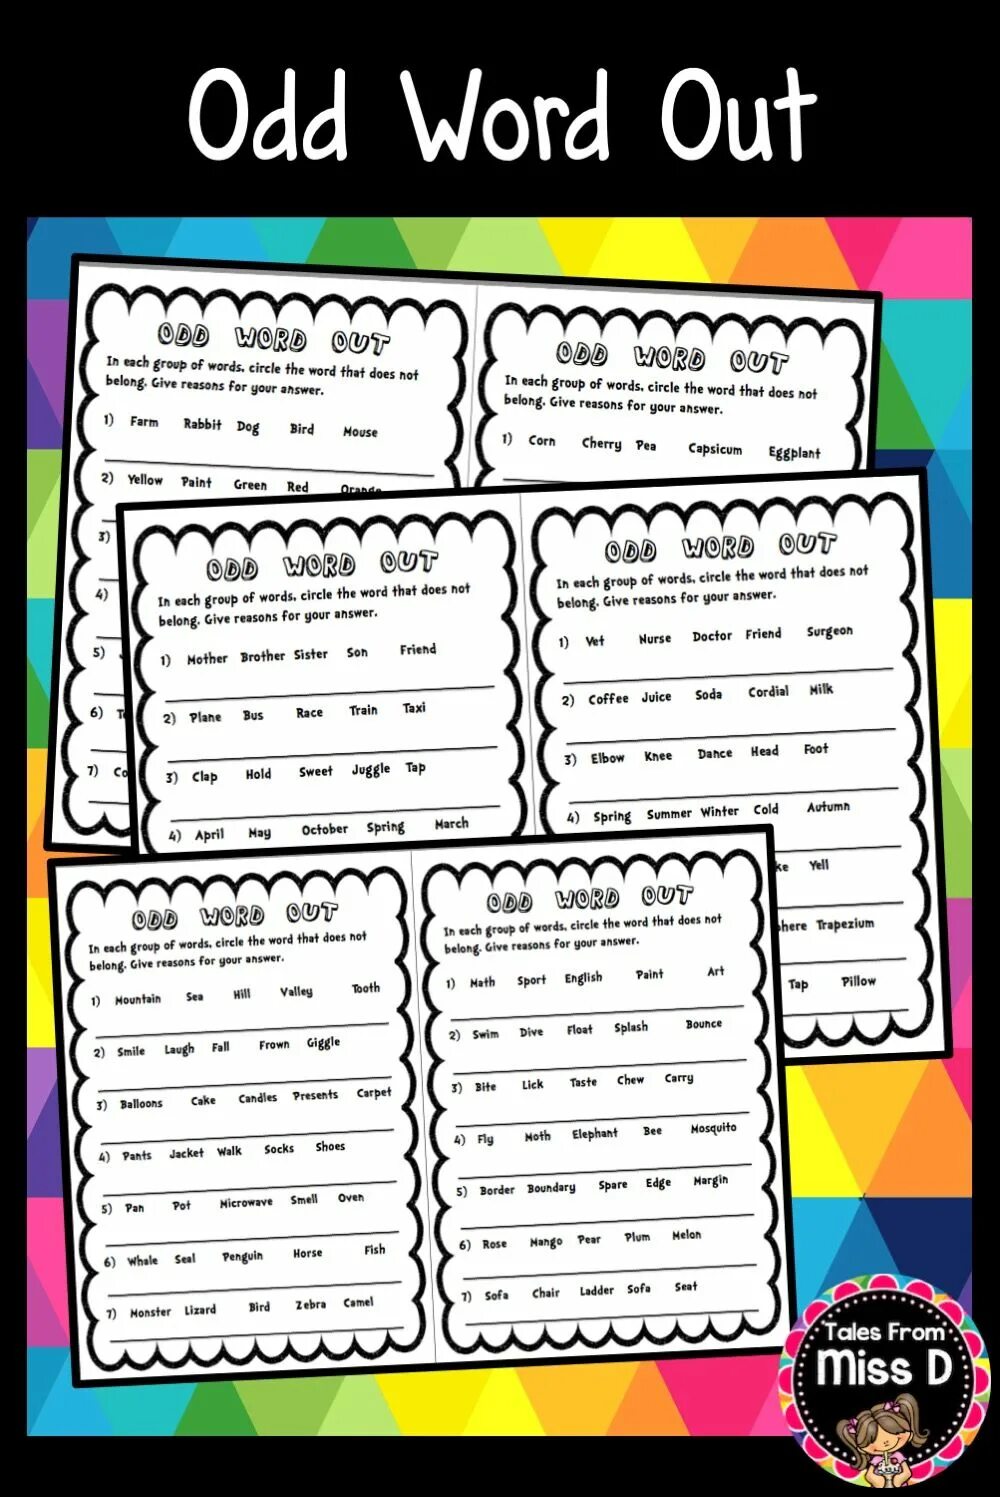 Cross the word out. Odd Word out. Задания odd Word. Odd Word Worksheets. Odd Word out Worksheets.